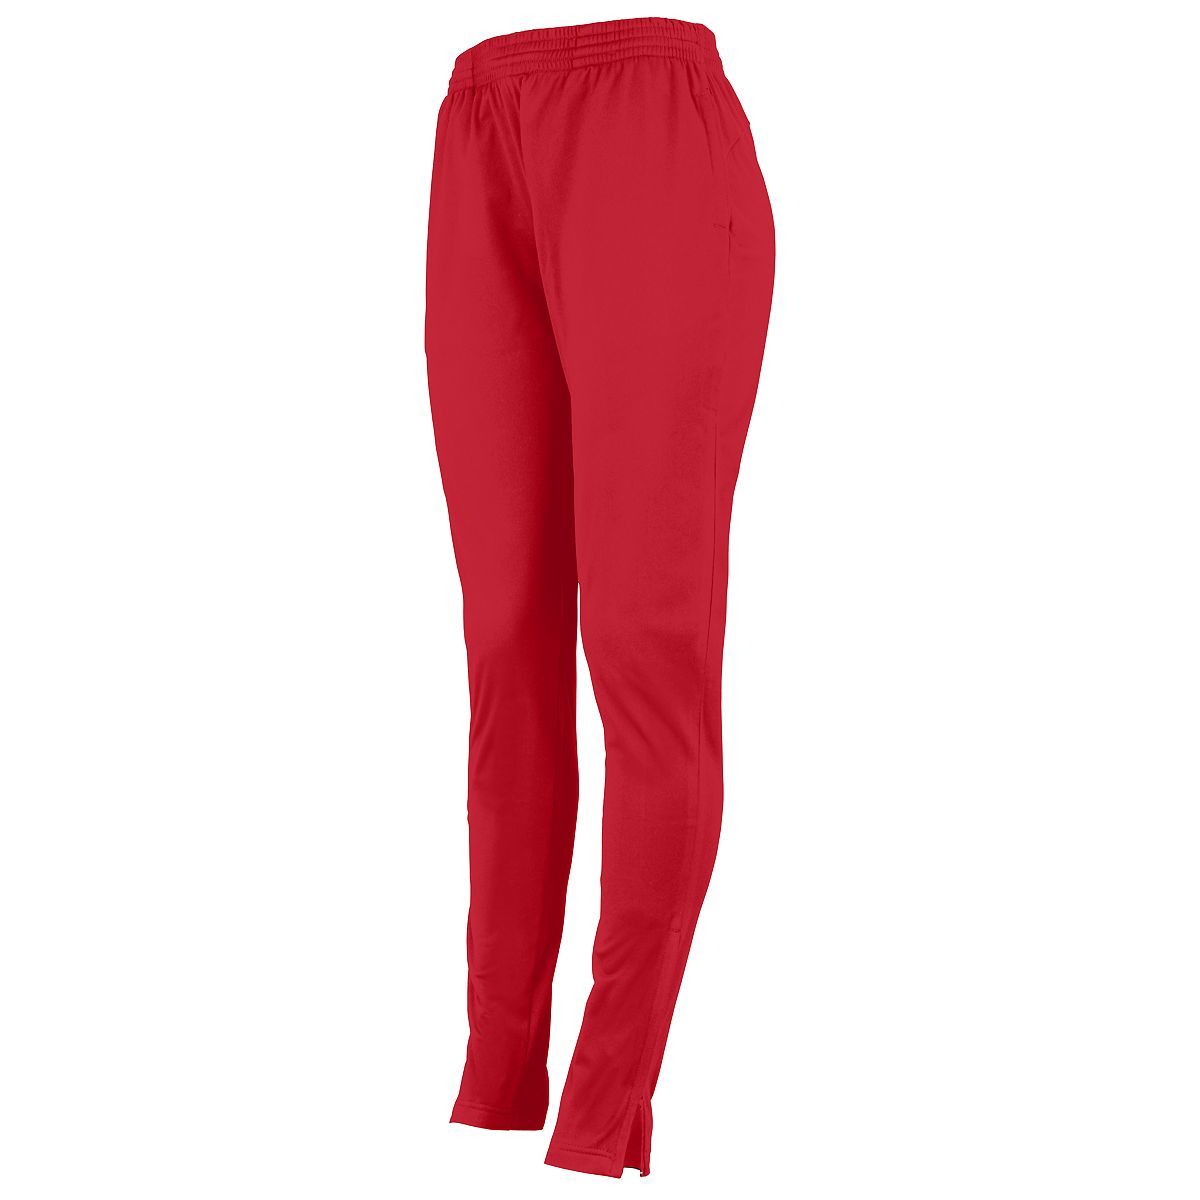 Augusta Sportswear Ladies Tapered Leg Pant in Red  -Part of the Ladies, Ladies-Pants, Pants, Augusta-Products product lines at KanaleyCreations.com